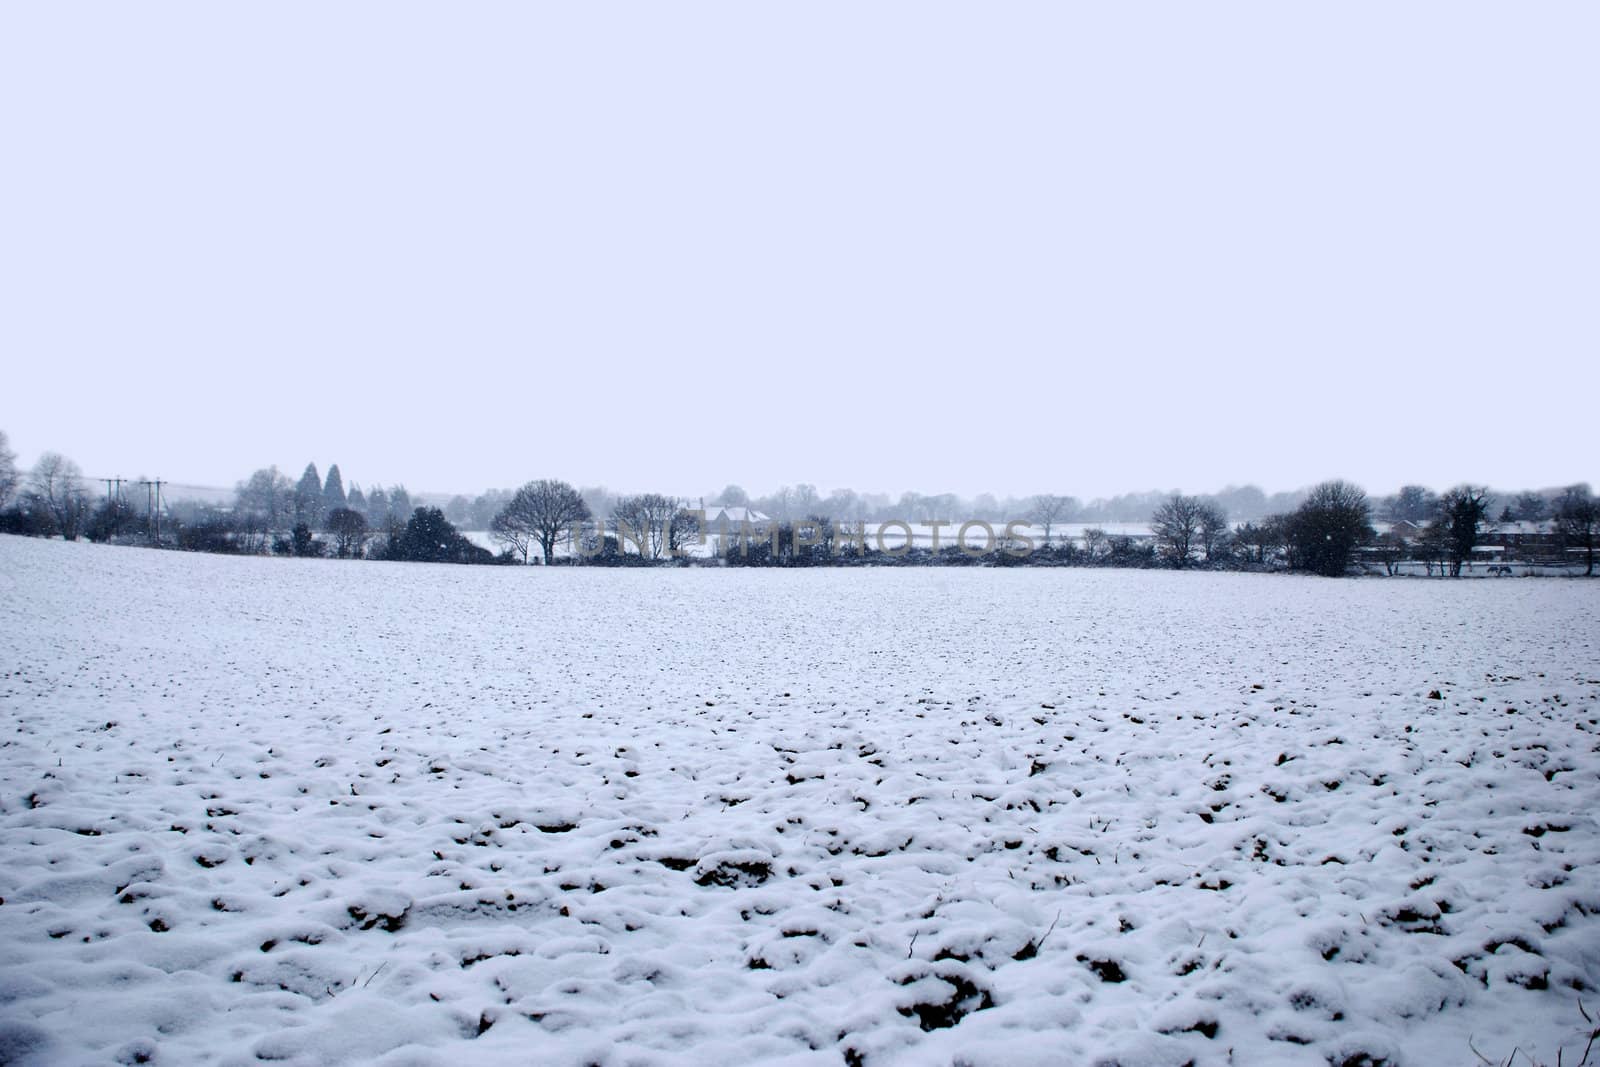 Snowy English winter landscape with a dark line of trees and hedgerow